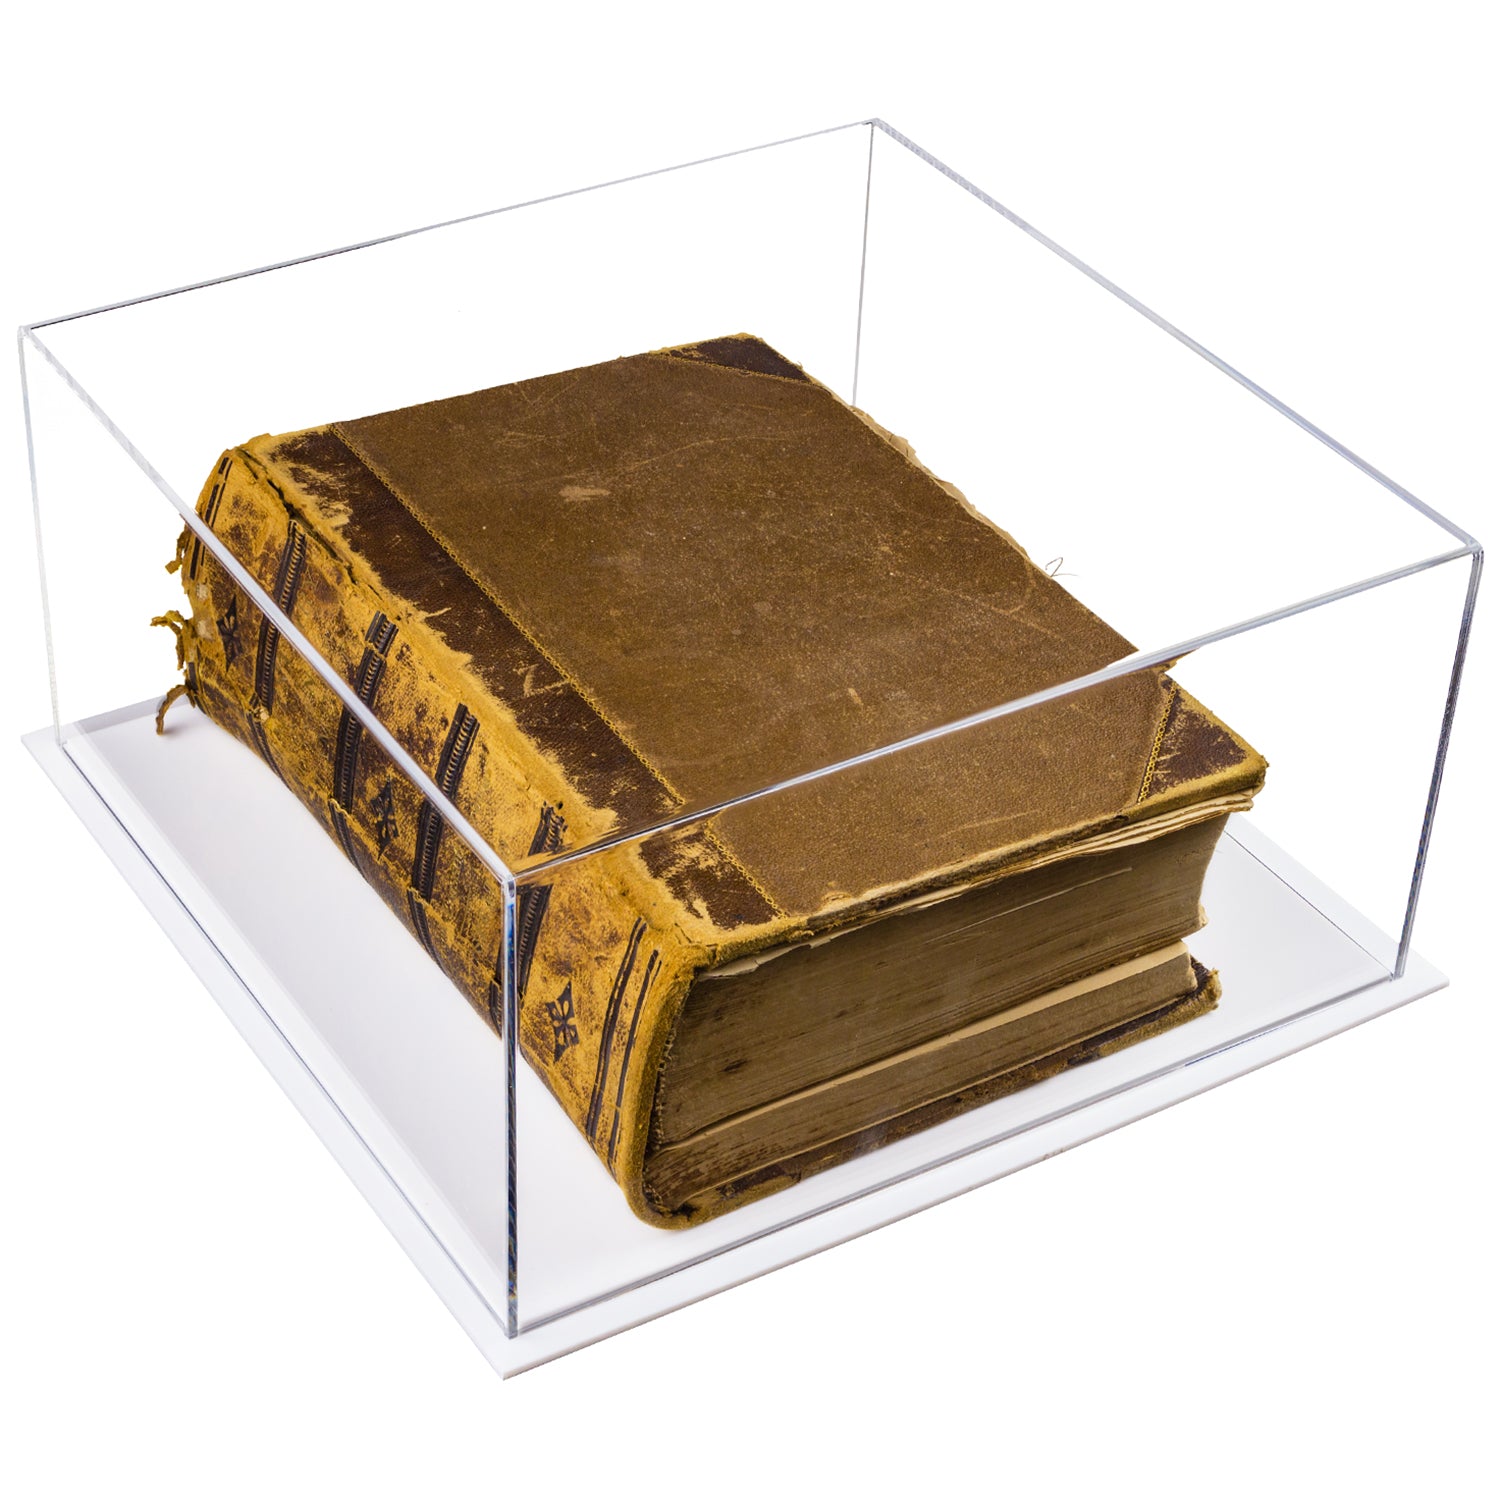 Book Display Cases for Books, Magazines and Pamphlets – Better